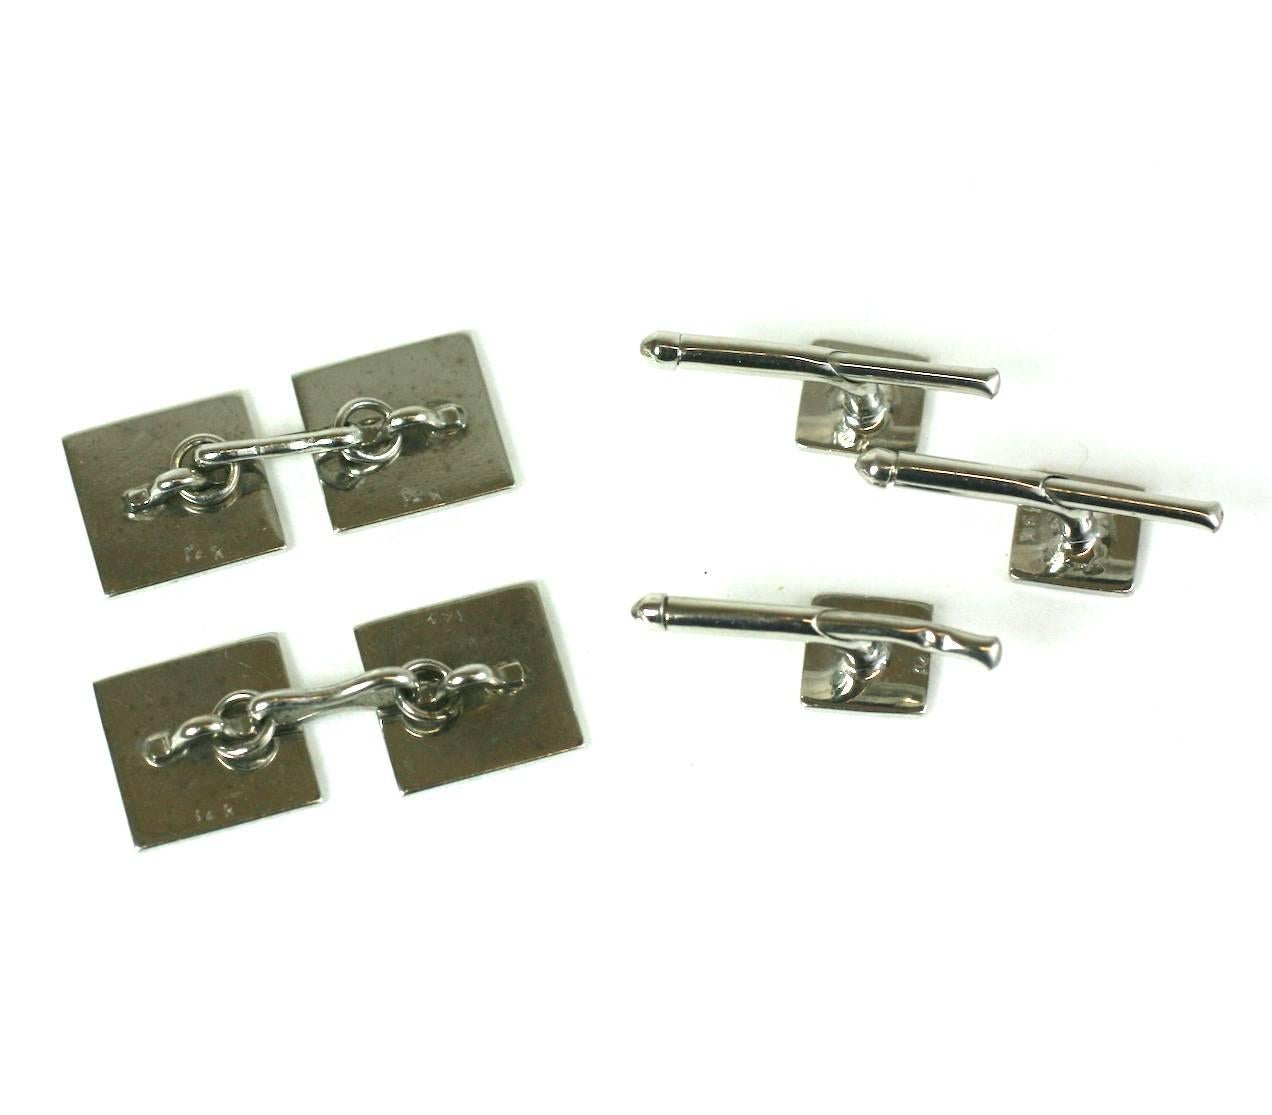 White gold Striped Stud Set in 14k gold from the 1930's. Cufflinks with 3 shirt studs. 
Excellent condition. Cufflinks .5